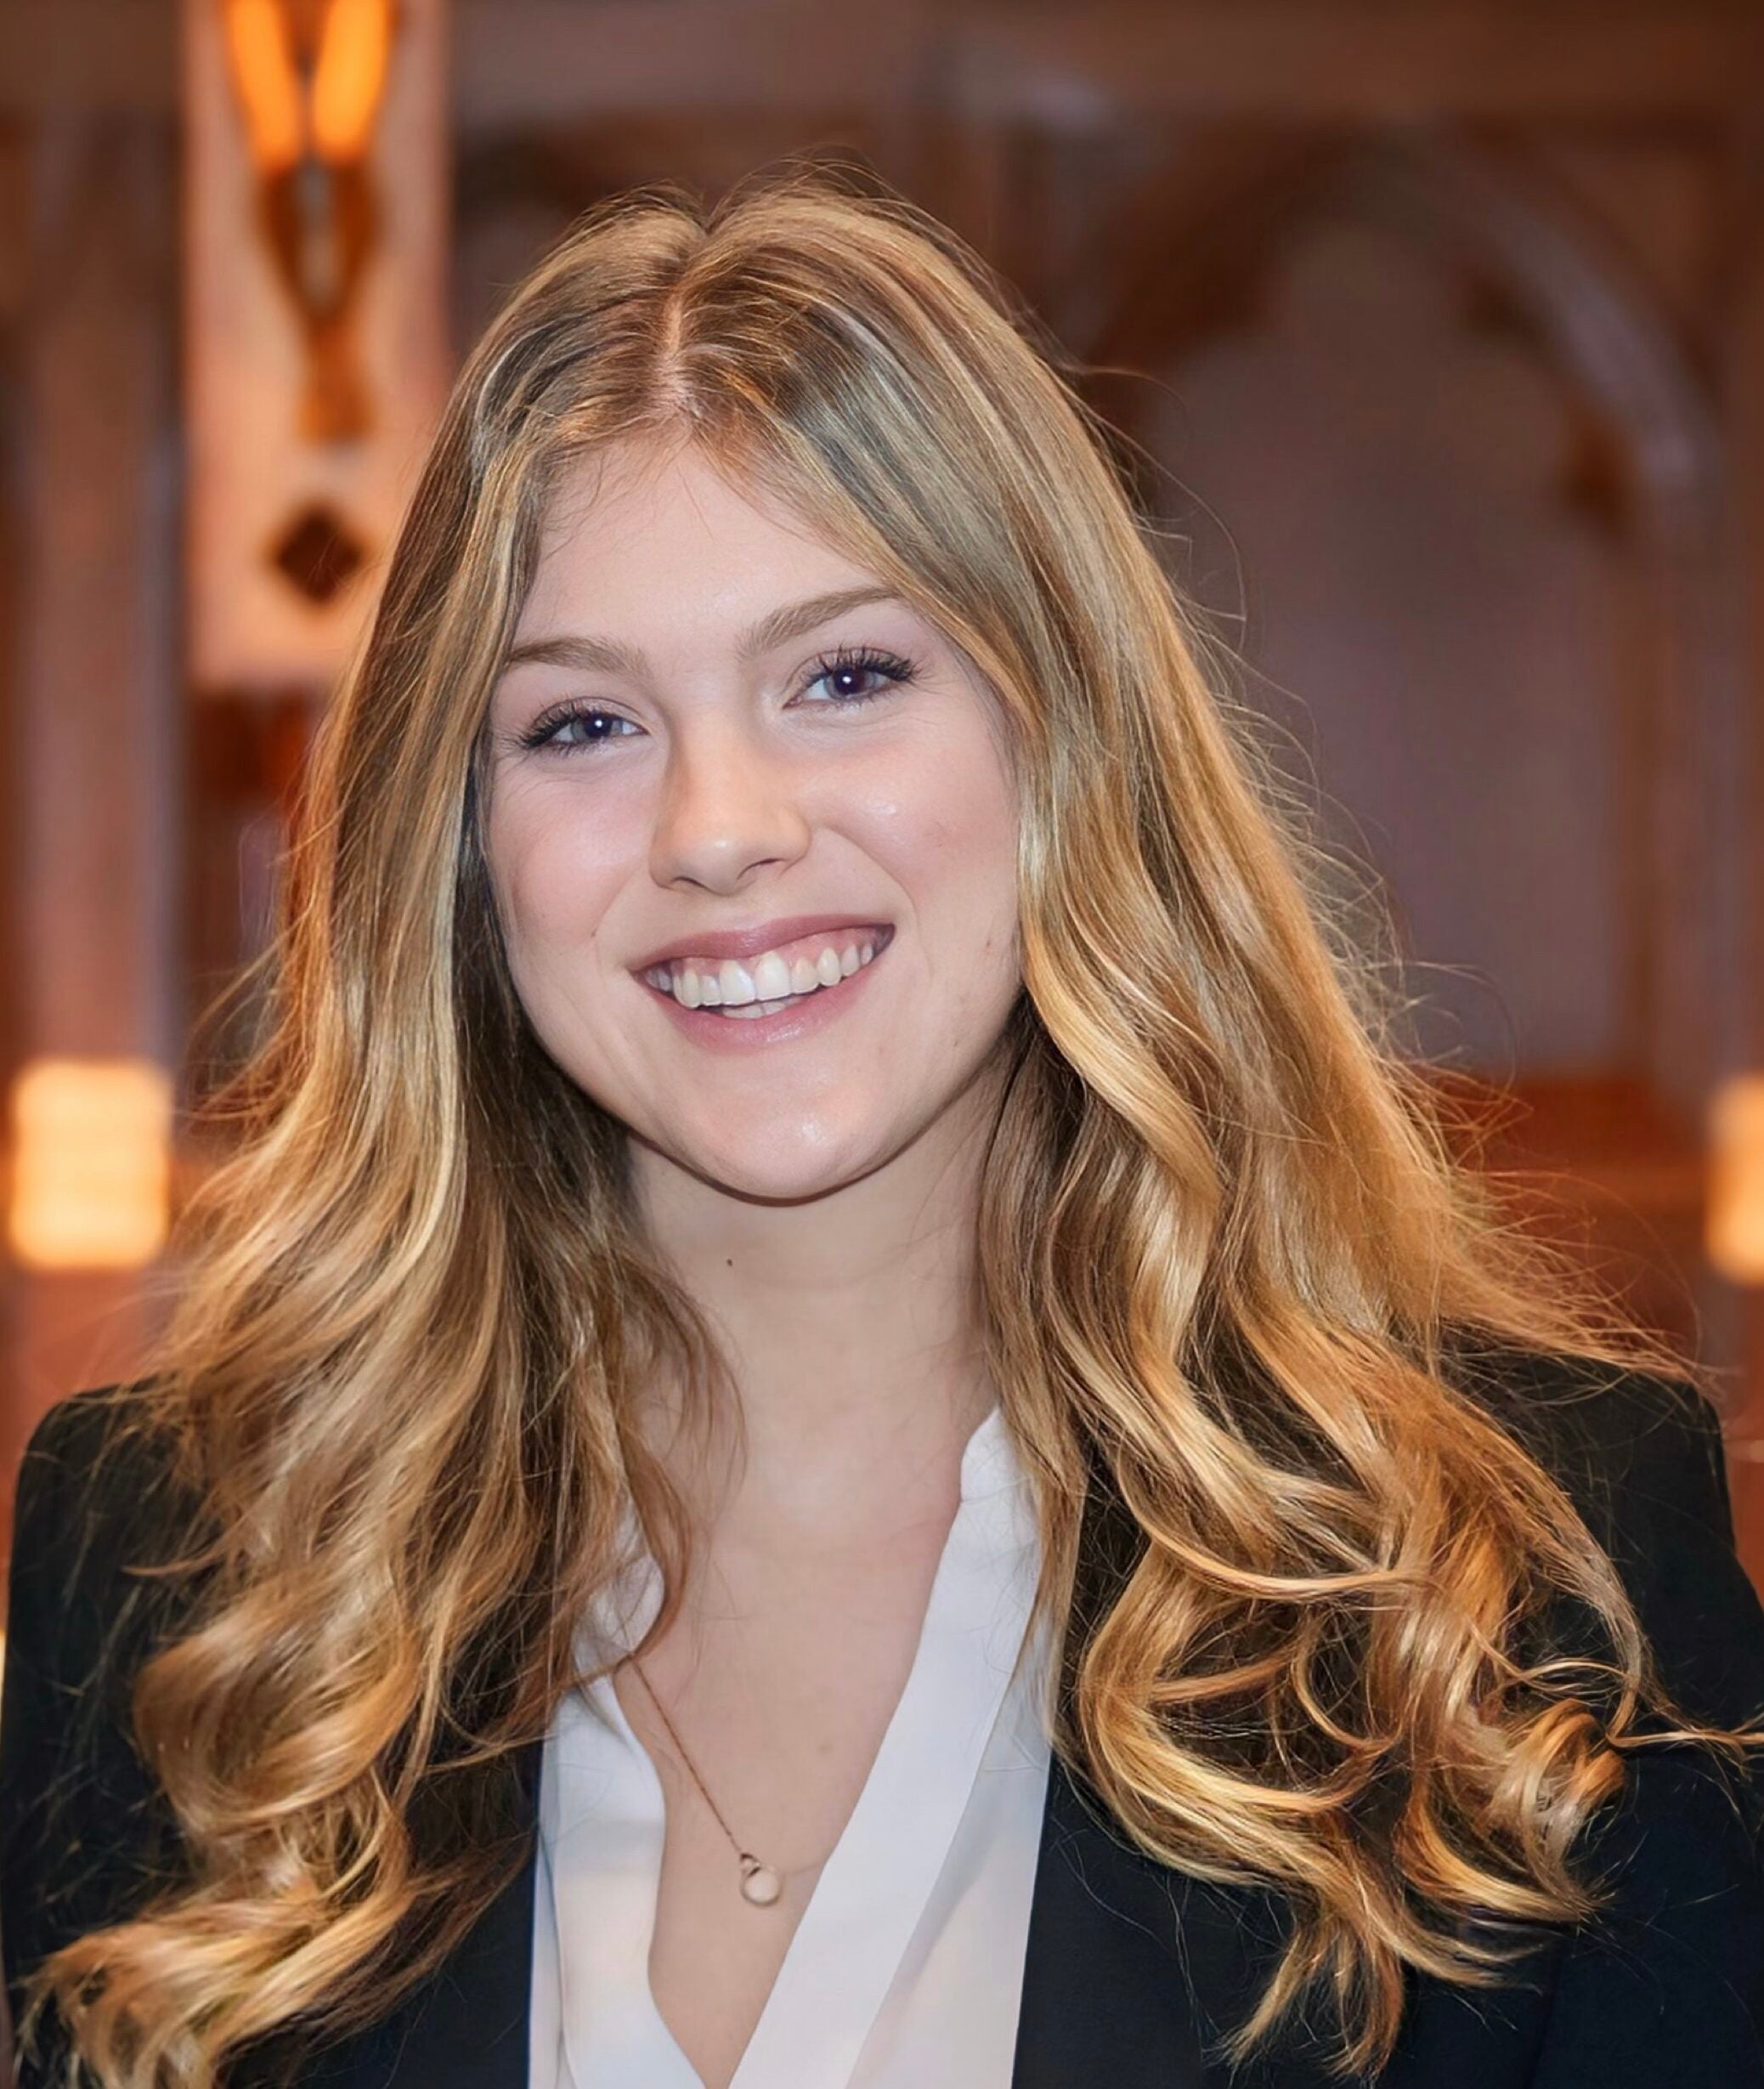 A girl with long, blonde hair smiles inside. The background is out-of-focus wood paneling. She wears a white blouse and a black, formal jacket. 